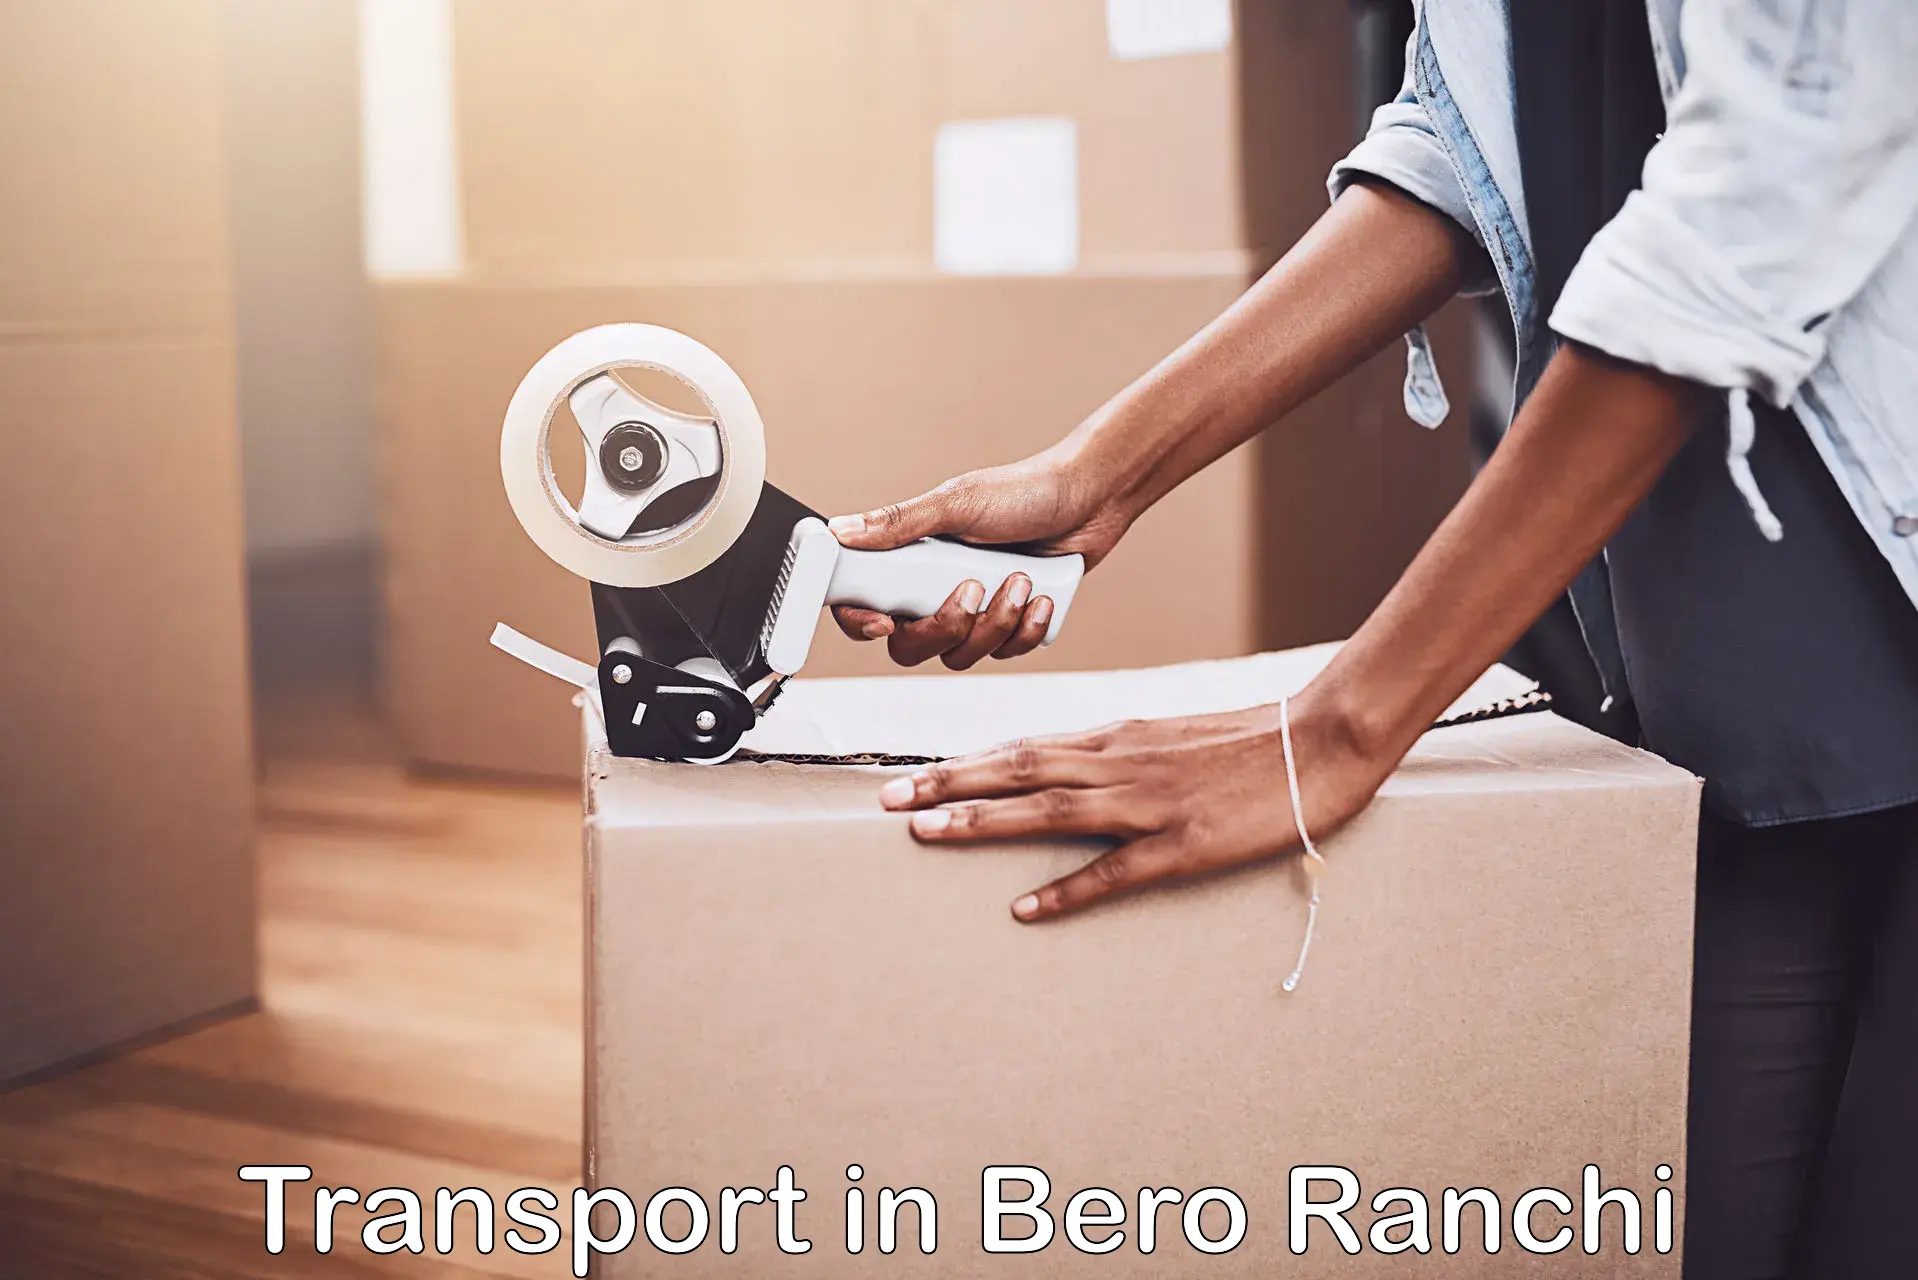 Express transport services in Bero Ranchi